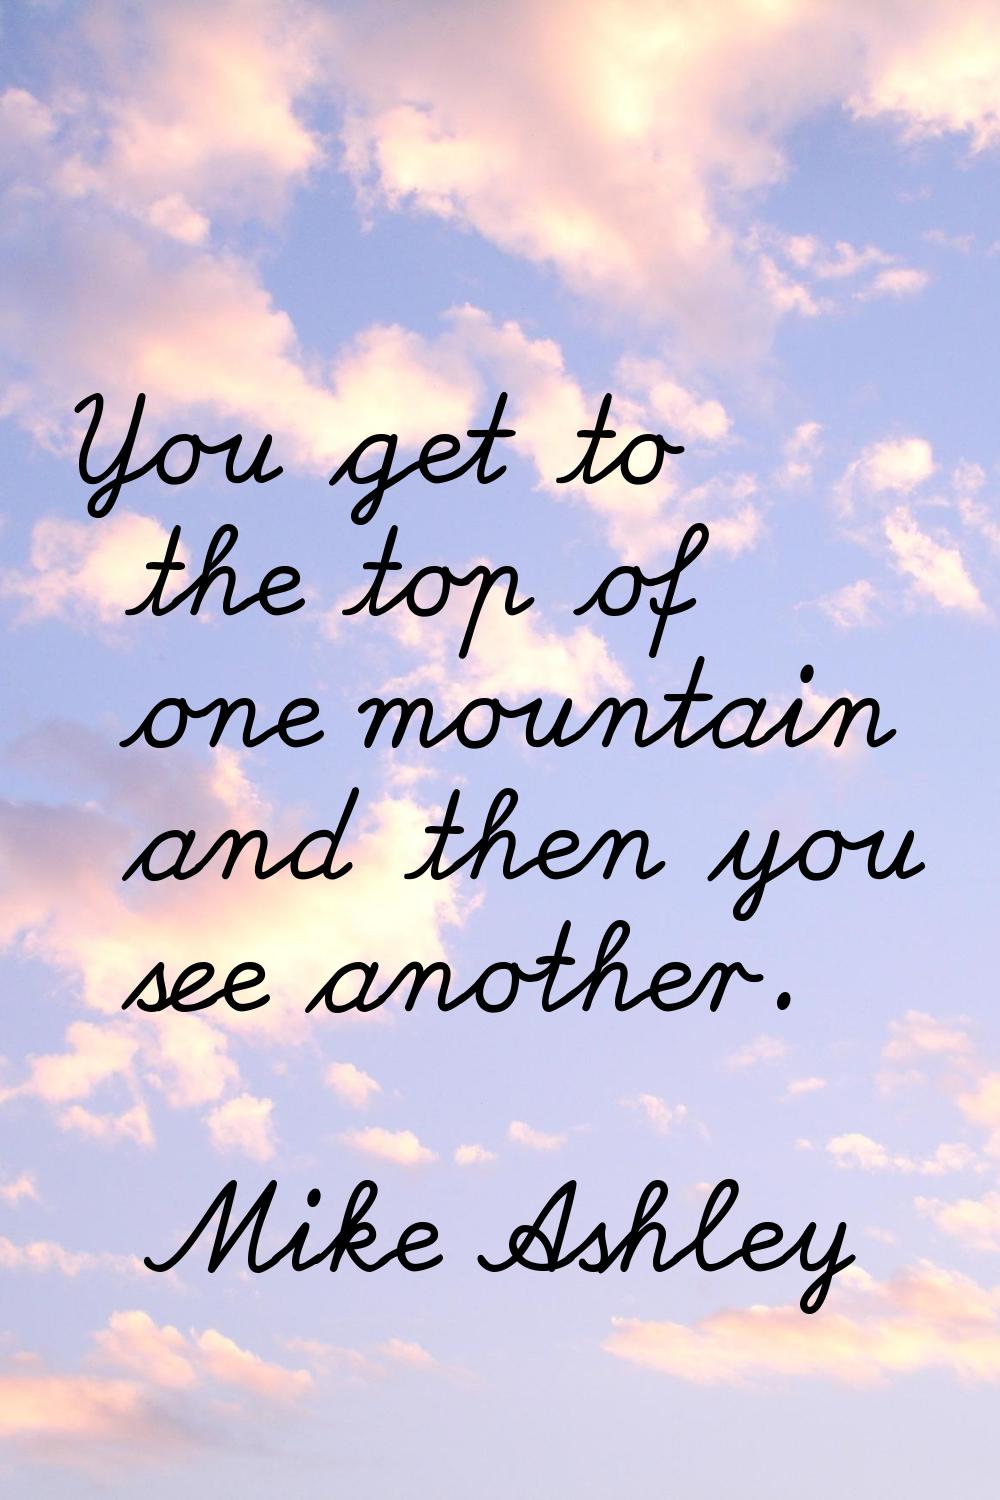 You get to the top of one mountain and then you see another.